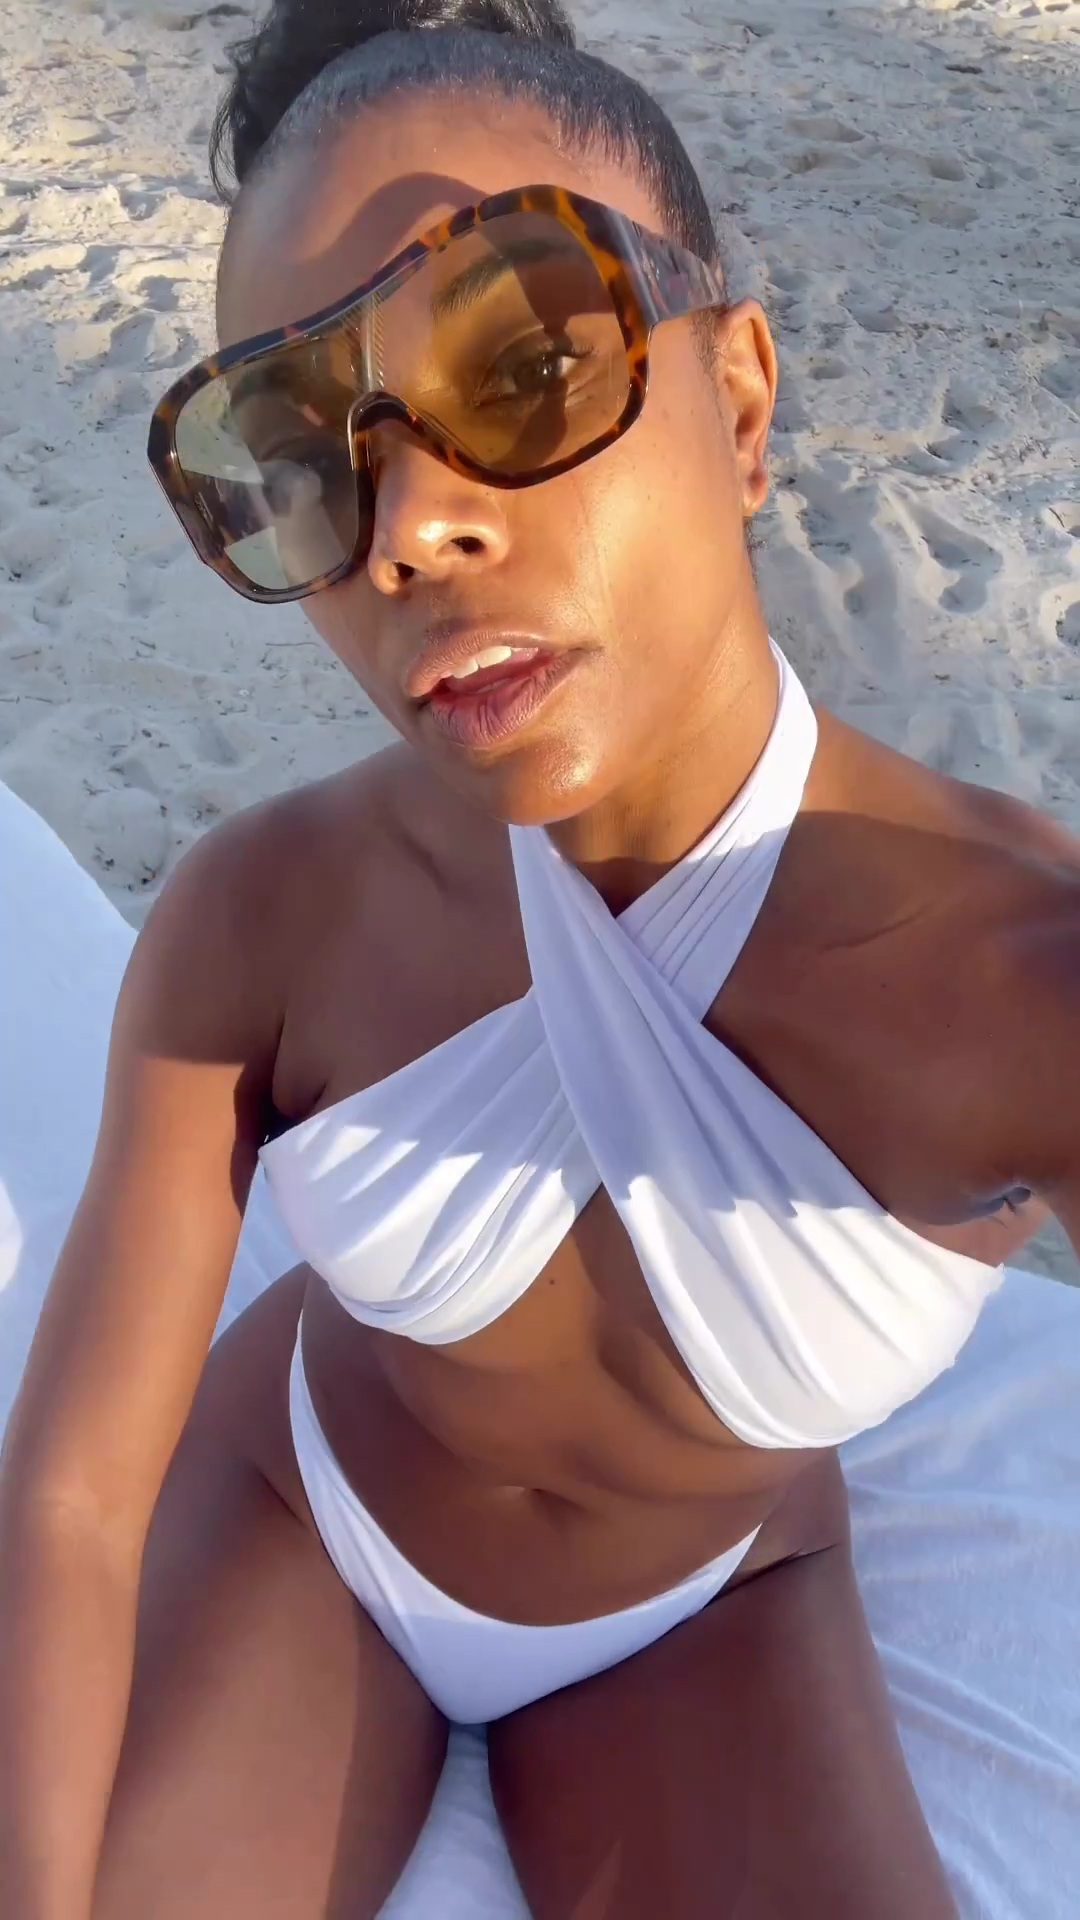 Gabrielle Union and Dwyane Wade are On the Beach!